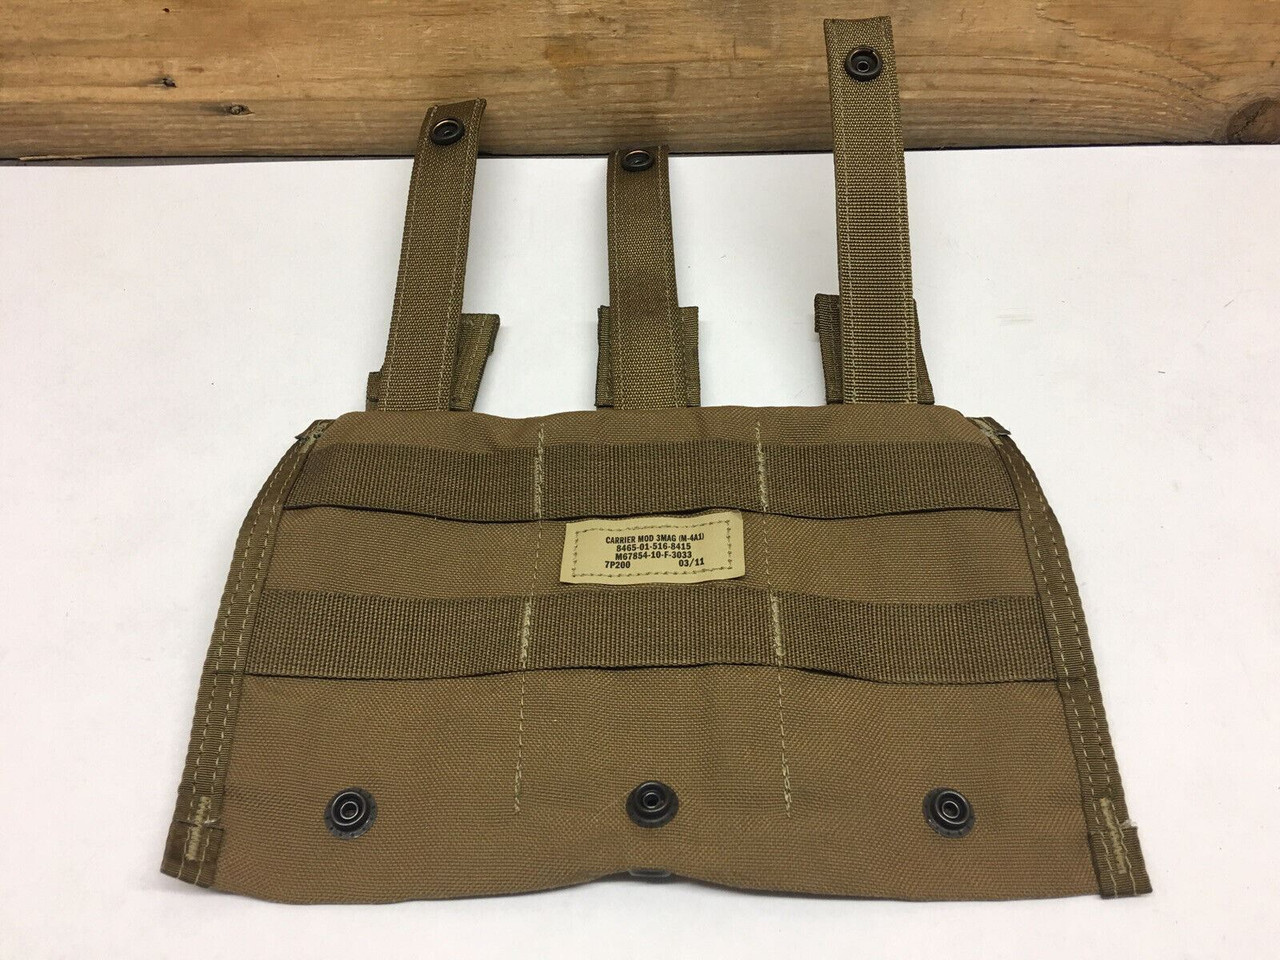 3 Mag M-4A1 Modular Carrier Pouch 8465-01-516-8415 Coyote Brown FSBE